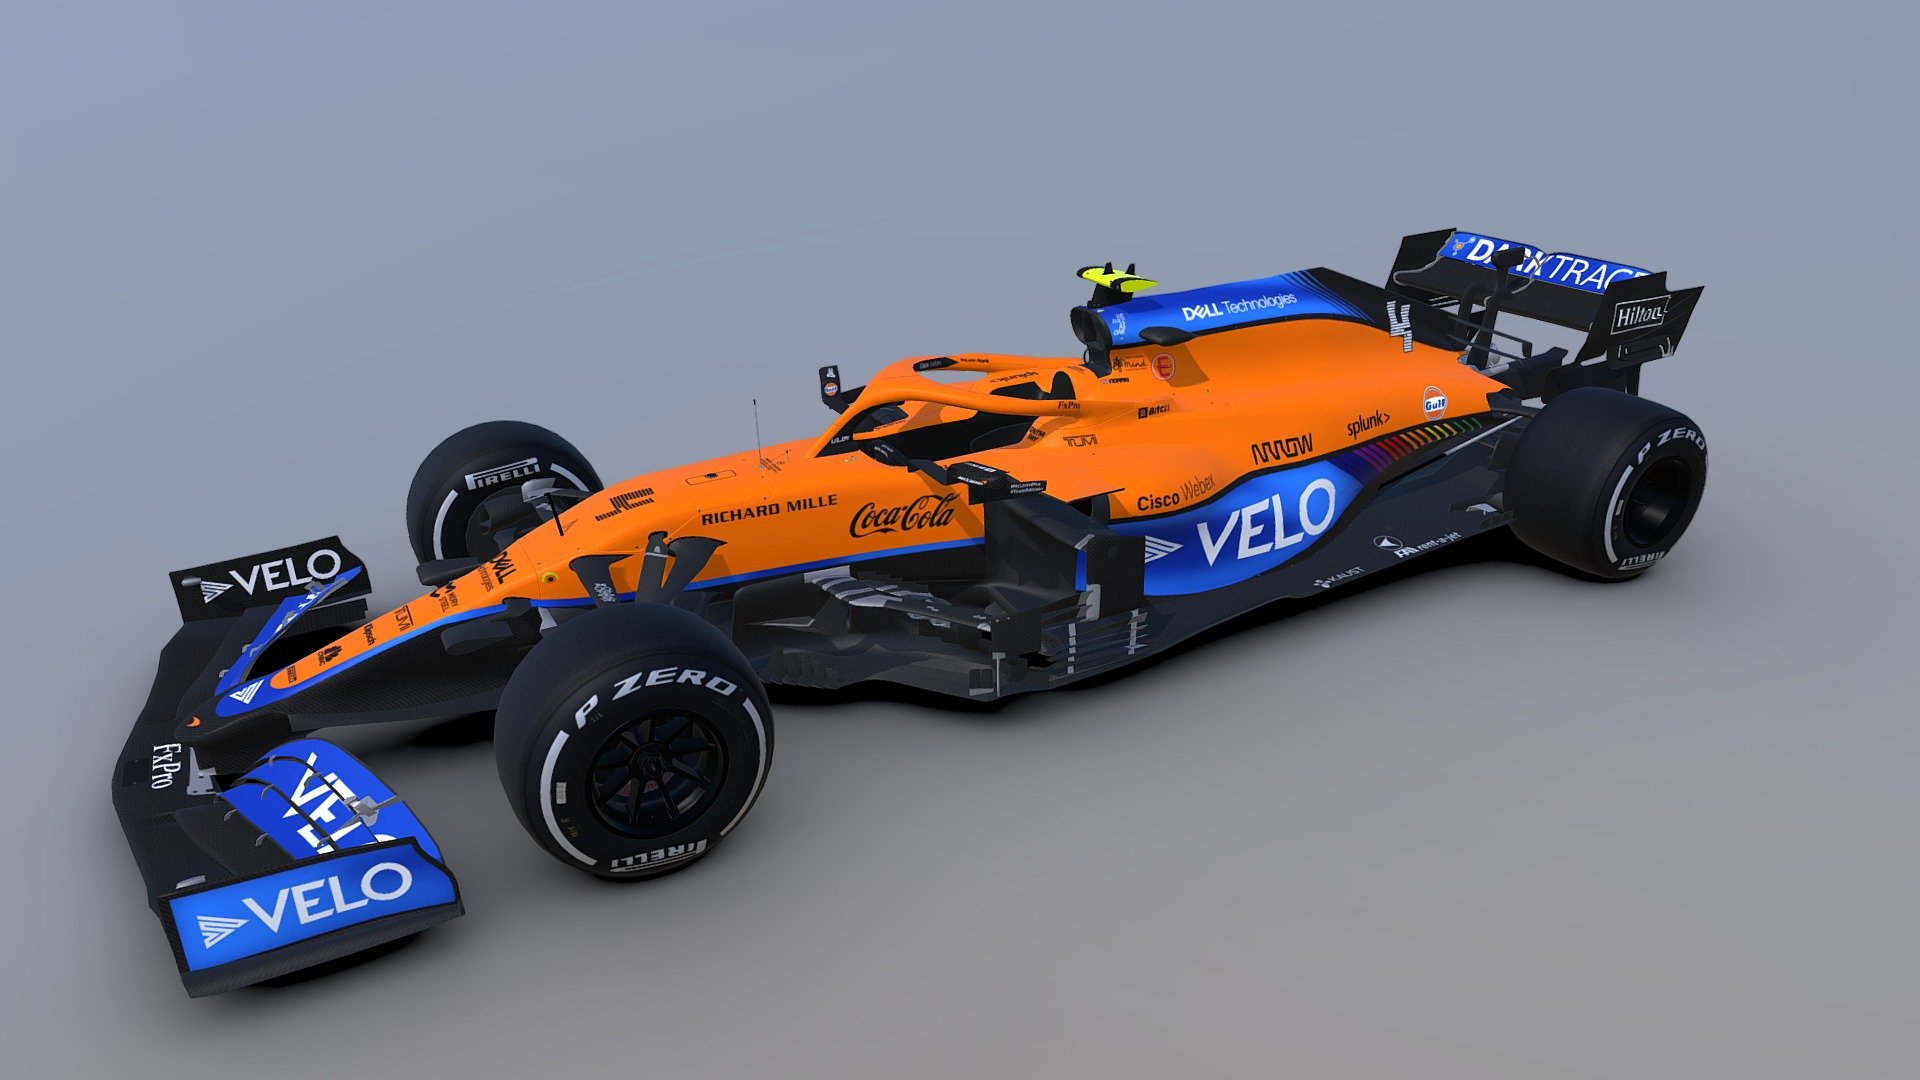 F1 2021 McLaren MCL35M 3D model for Grand Prix 4 game.
Shape and livery version: Emilia Romagna - Imola GP

08/07/2021: Exceptionally, this car is now Free to download. You can use it for personal projects. For public use, I will just ask you to credit me as the original author.
It is strictly forbidden to sell this 3d model on stock 3D models resellers, such as Turbosquid or Renderhub.
If so, it will be reported and I won't allow to download this car for free anymore.
Thank you for your support 3d model